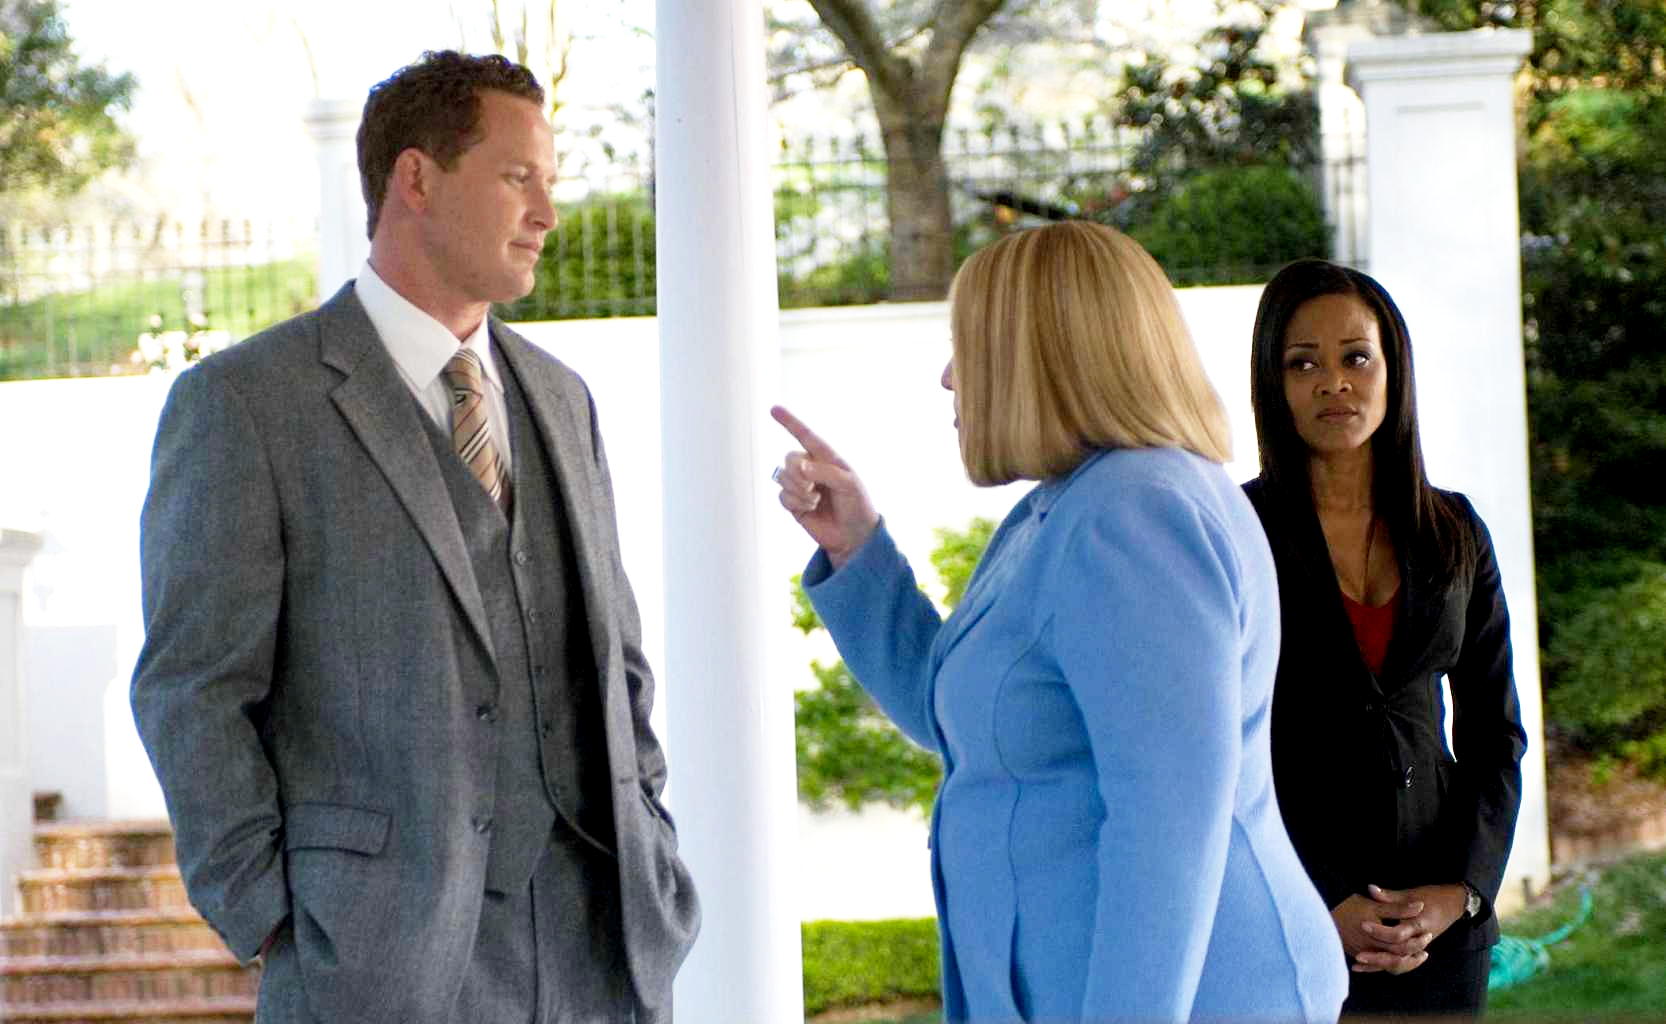 Cole Hauser, Kathy Bates and Robin Givens in Lionsgate Films' The Family That Preys (2008). Photo credit by Alfeo Dixon.